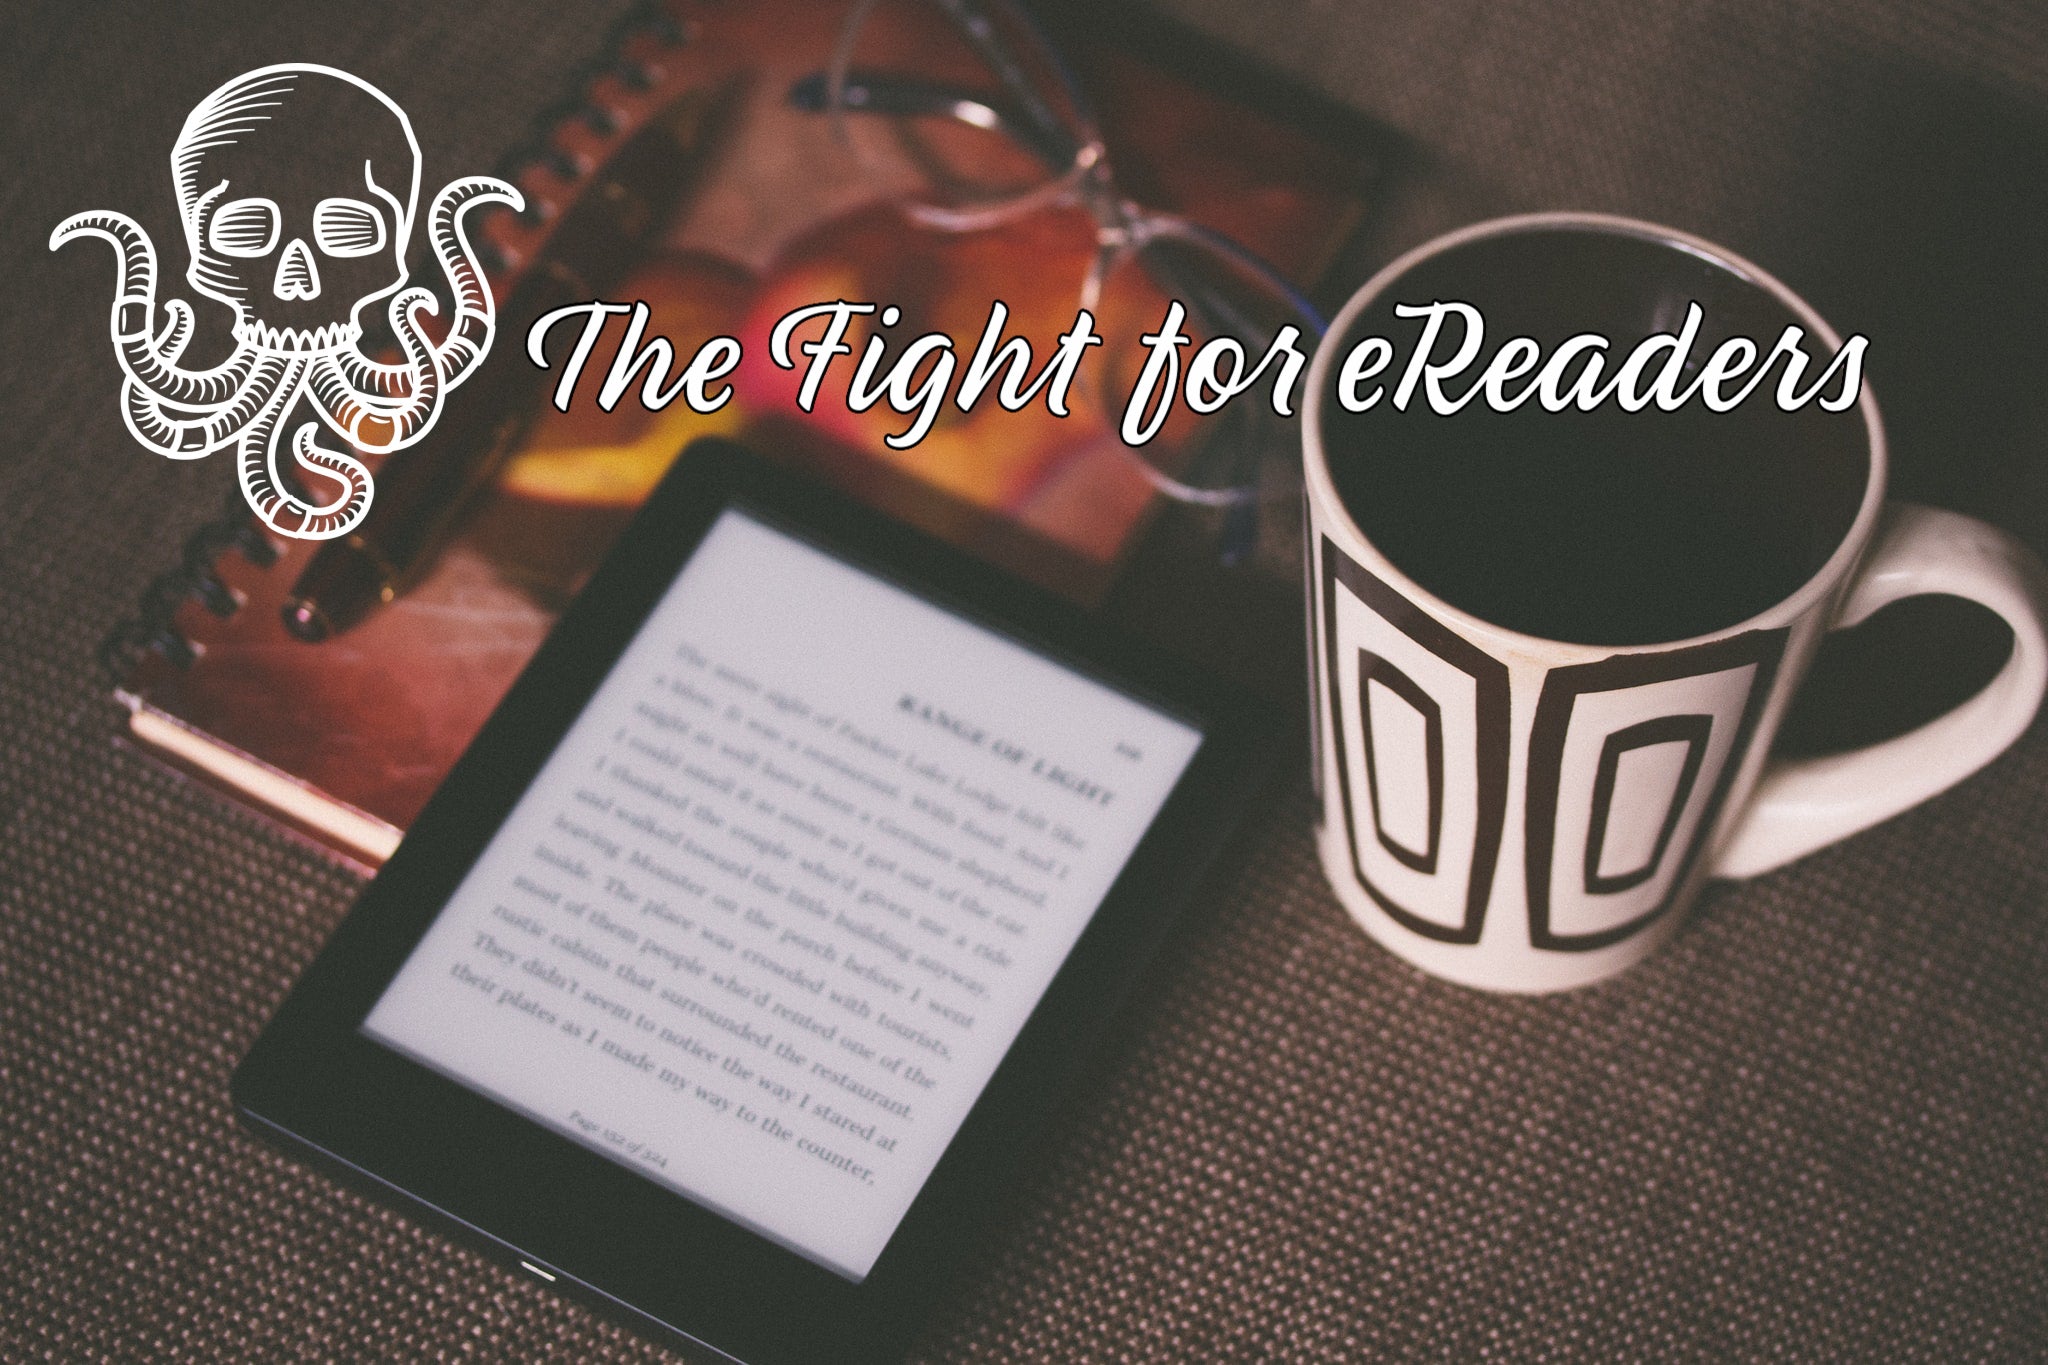 The Fight for eReaders by Richelle